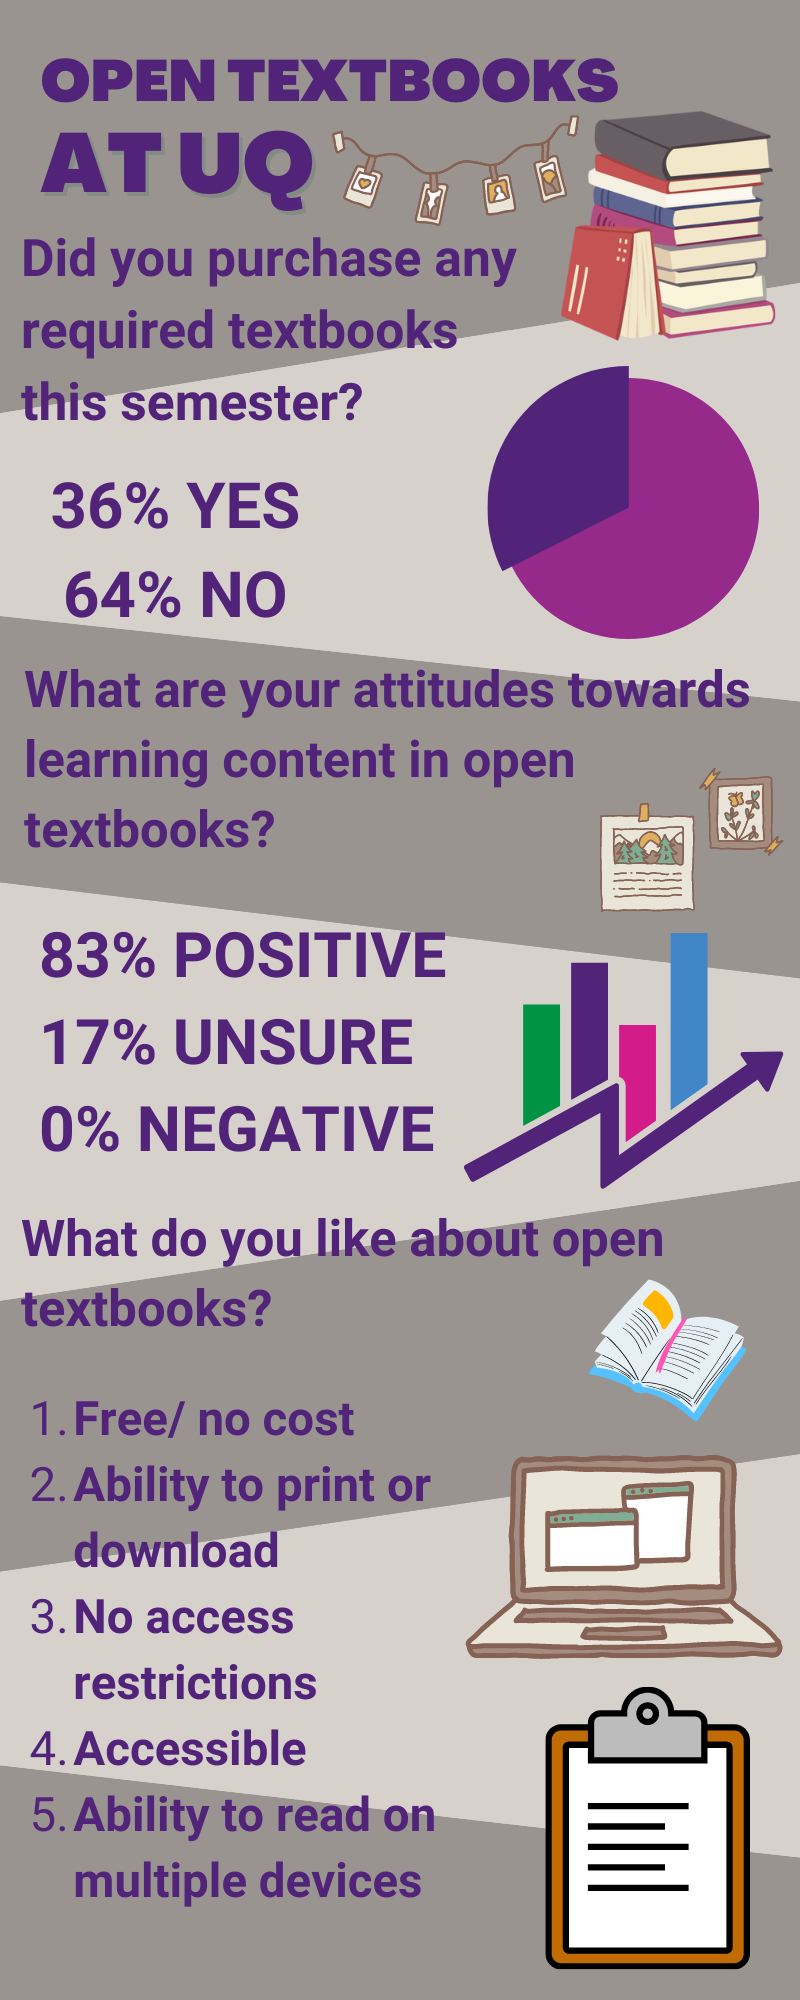 Info graphic - Open textbooks at UQ. Did you purchase any required textbooks this semester? 36% Yes, 64% No. What are your attitudes to learning content in open content? 83% Positive, 17% Unsure, 0% Negative. What do you like about open textbooks? 1. Free/ no cost 2. Ability to print or download 3. No access restrictions 4. Accessible 5. Ability to read on multiple devices